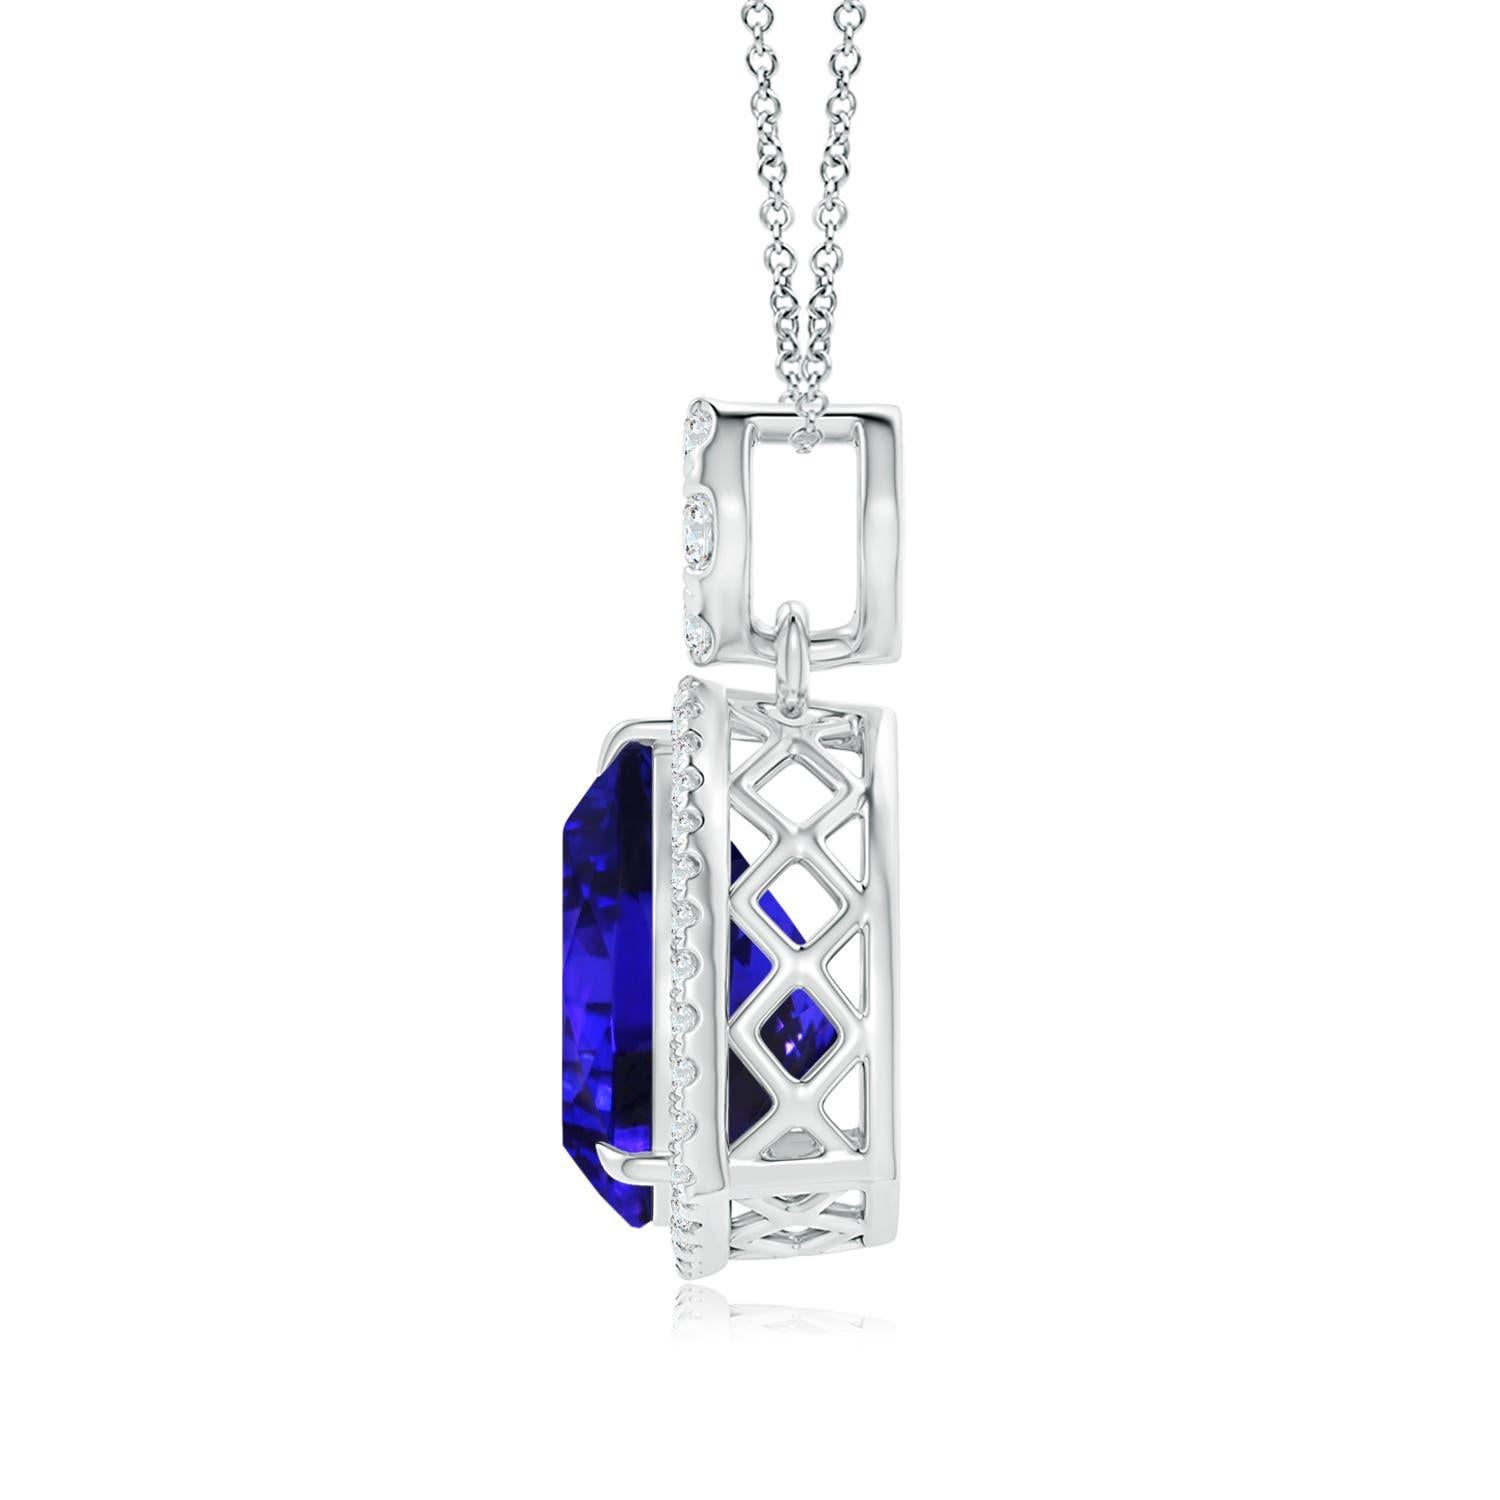 Connected to a diamond-studded bale is a GIA certified trillion tanzanite halo pendant in 18k white gold. While the halo diamonds are secured in U pave settings, the bale features prong-set diamonds in a cluster. The chequered filigree on the metal